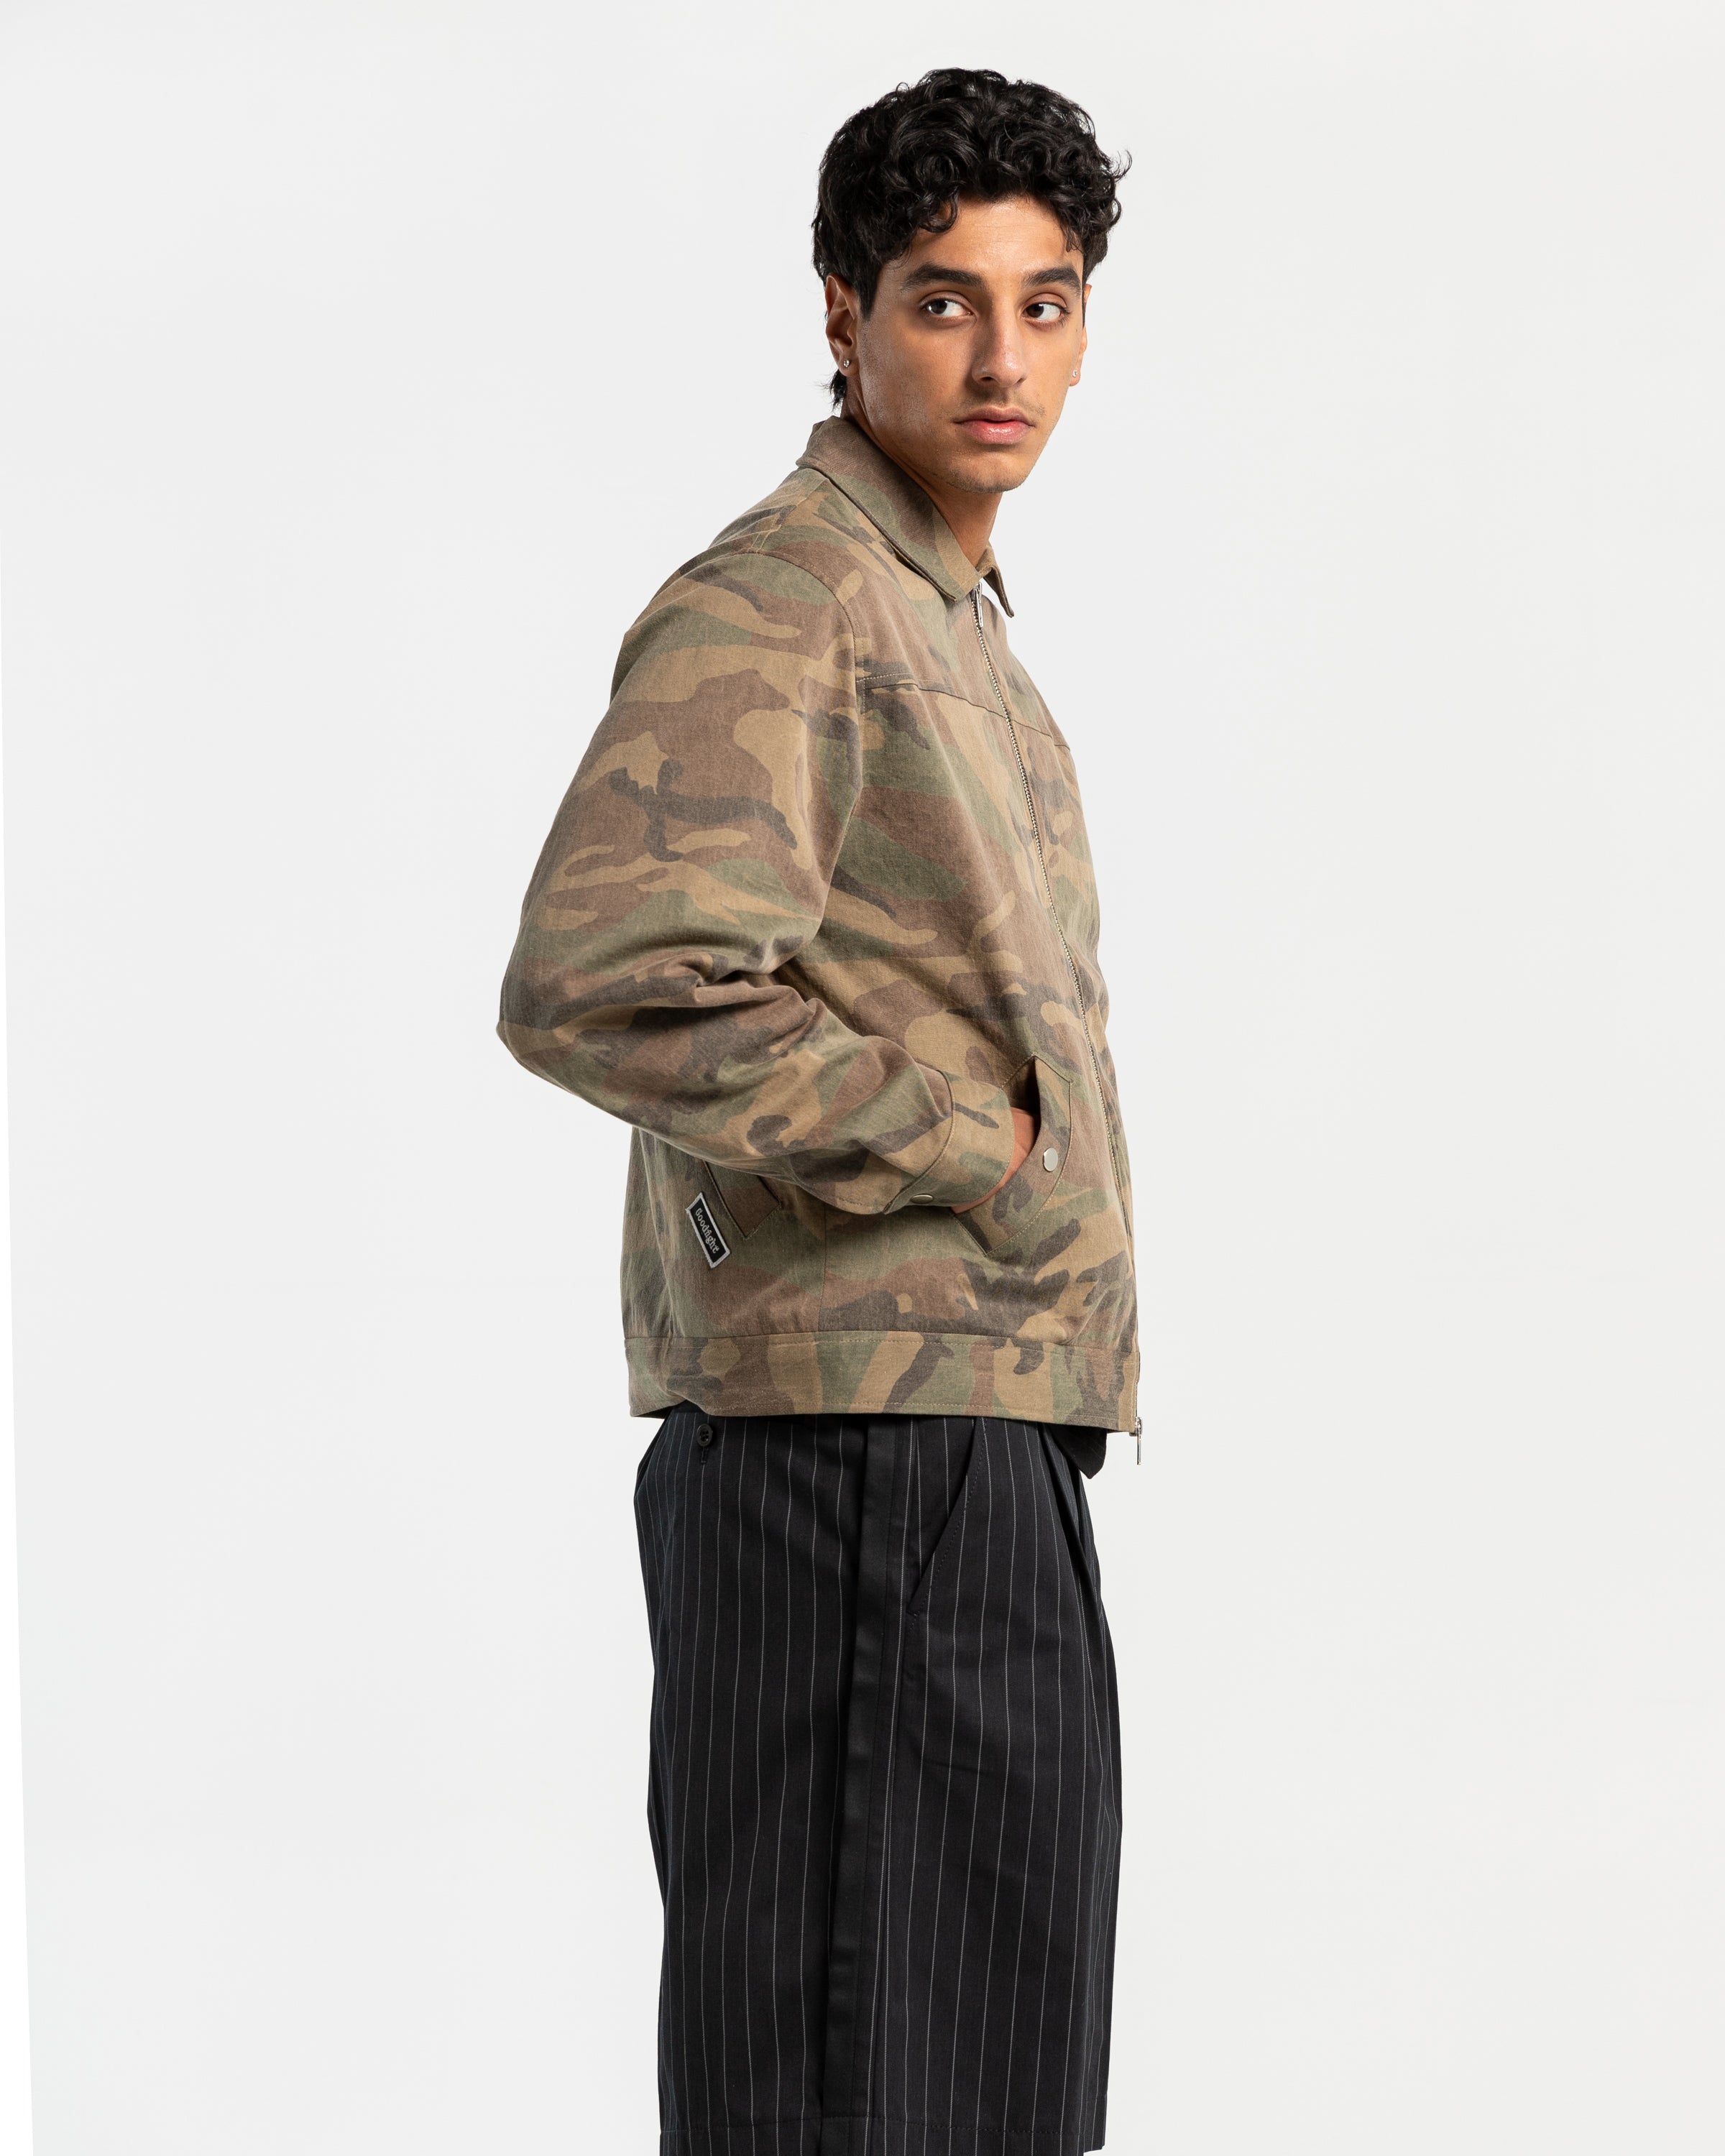 Reflection Jacket in Selvedge in Military Camo